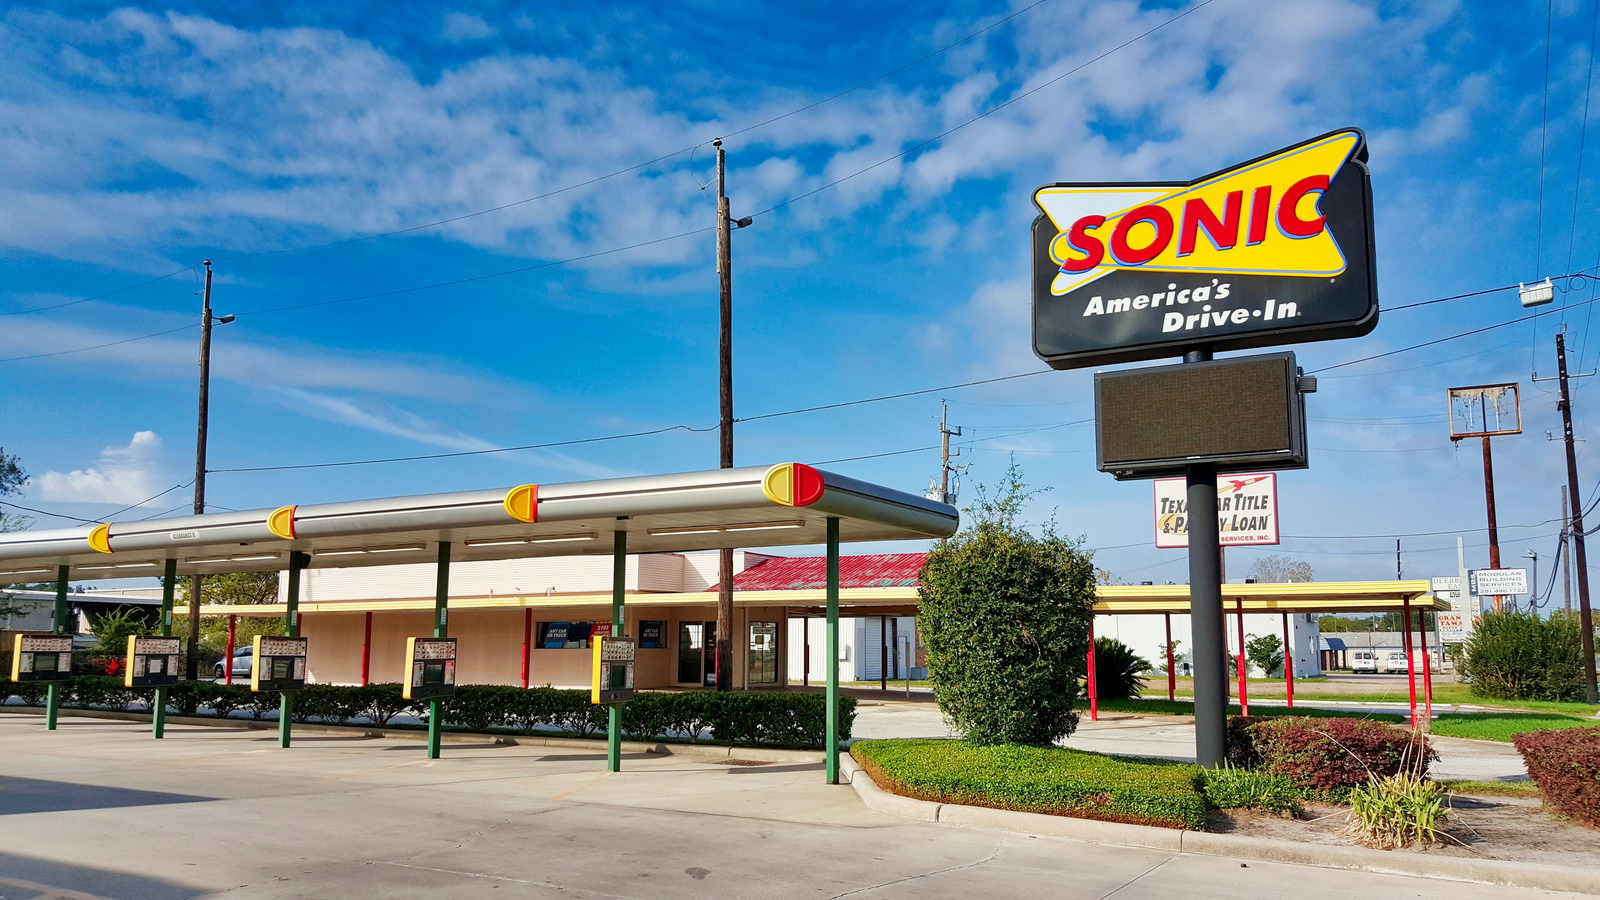 Sonic Hard Beverages – All your favorite SONIC flavors are now